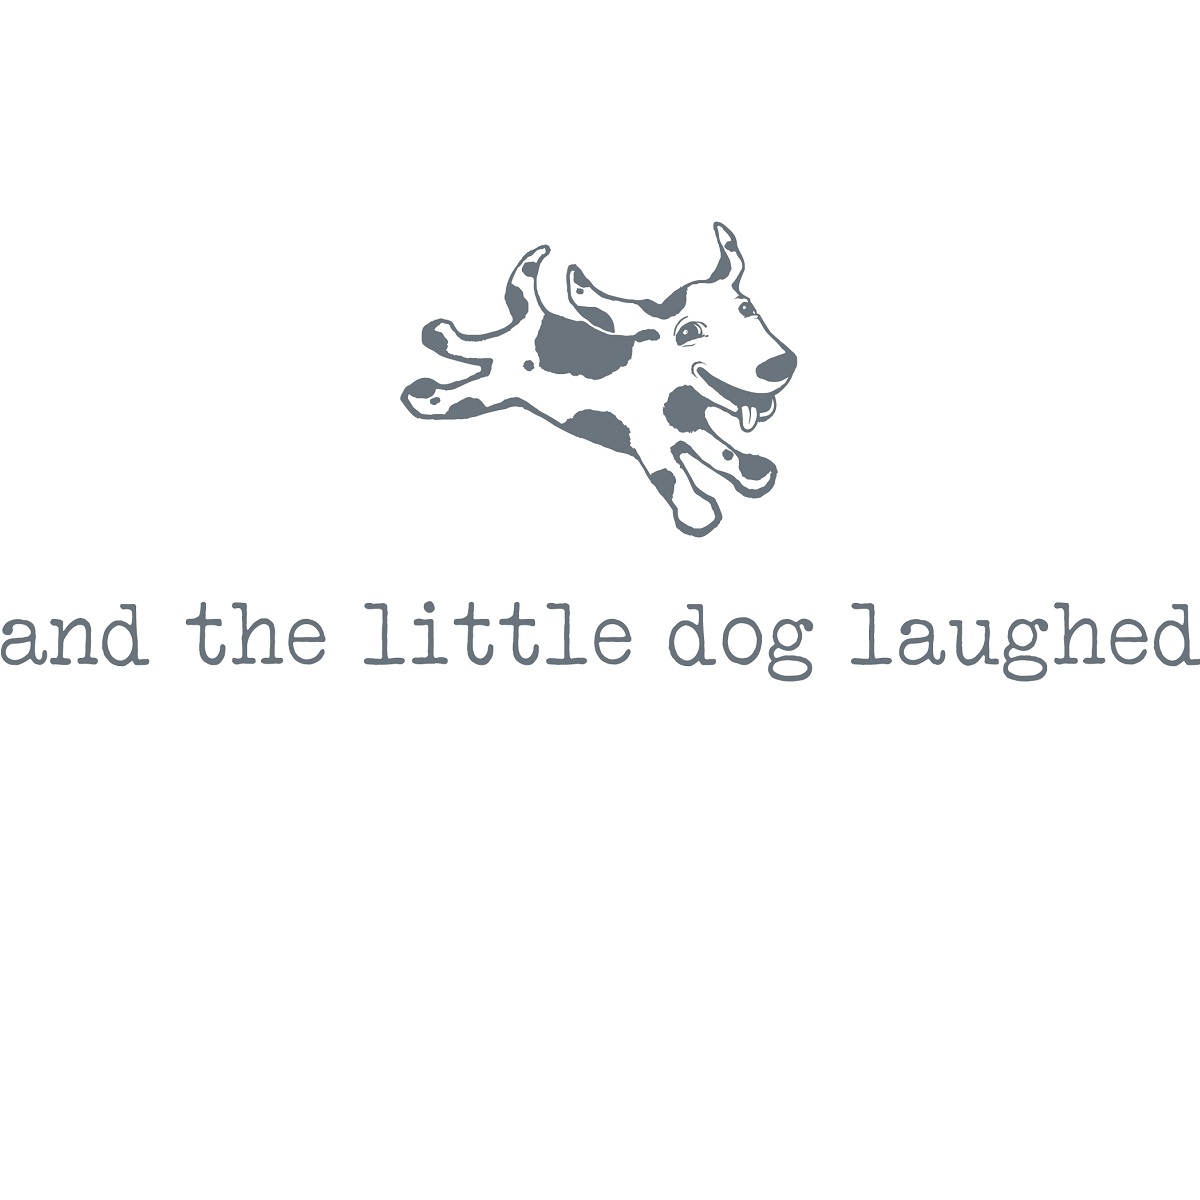 and the little dog laughed